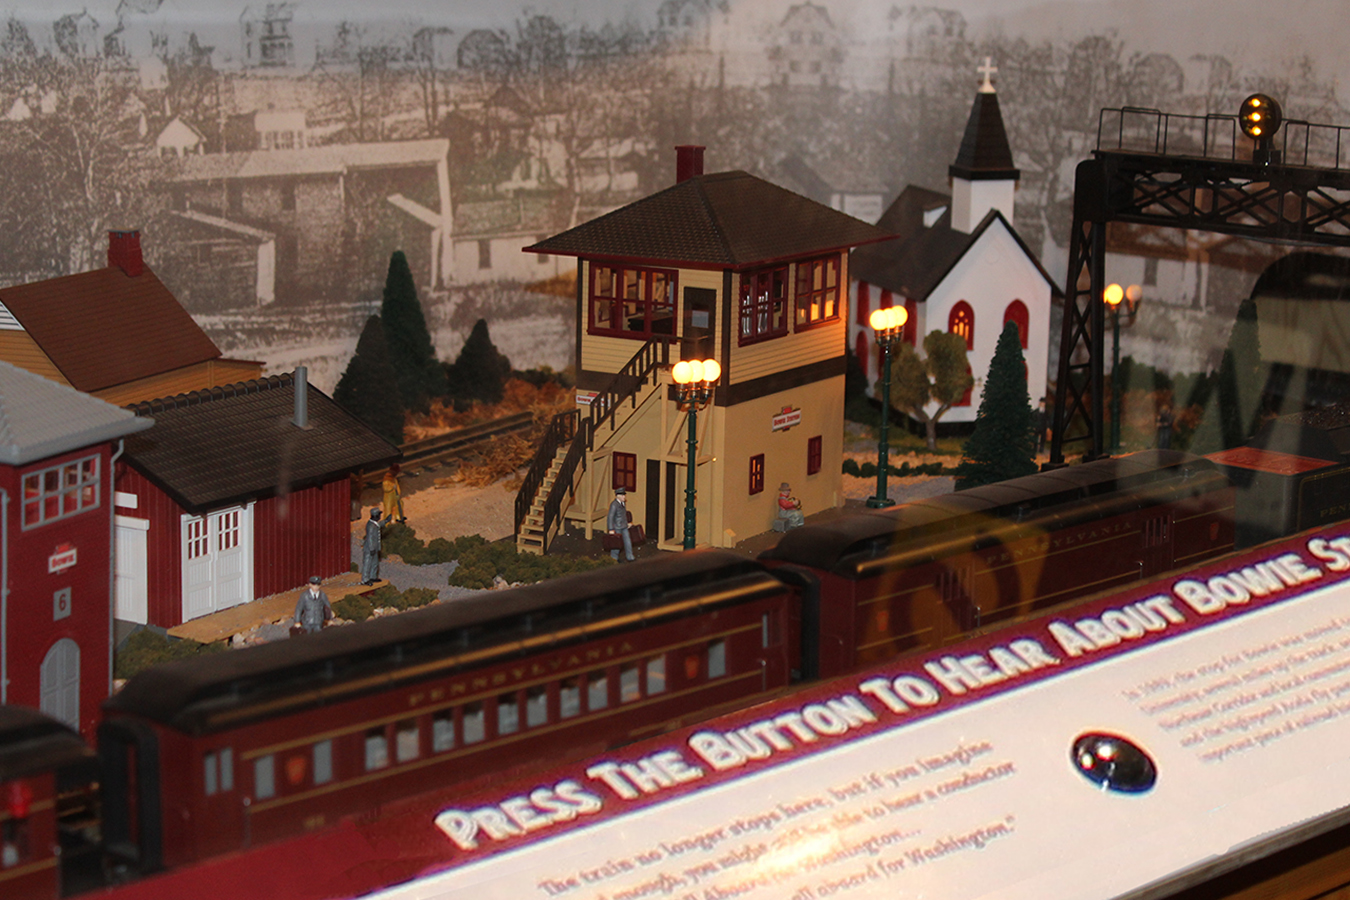 Bowts 7 : "All Aboard" A/V train model of Bowie Junction tells town history as train passes through